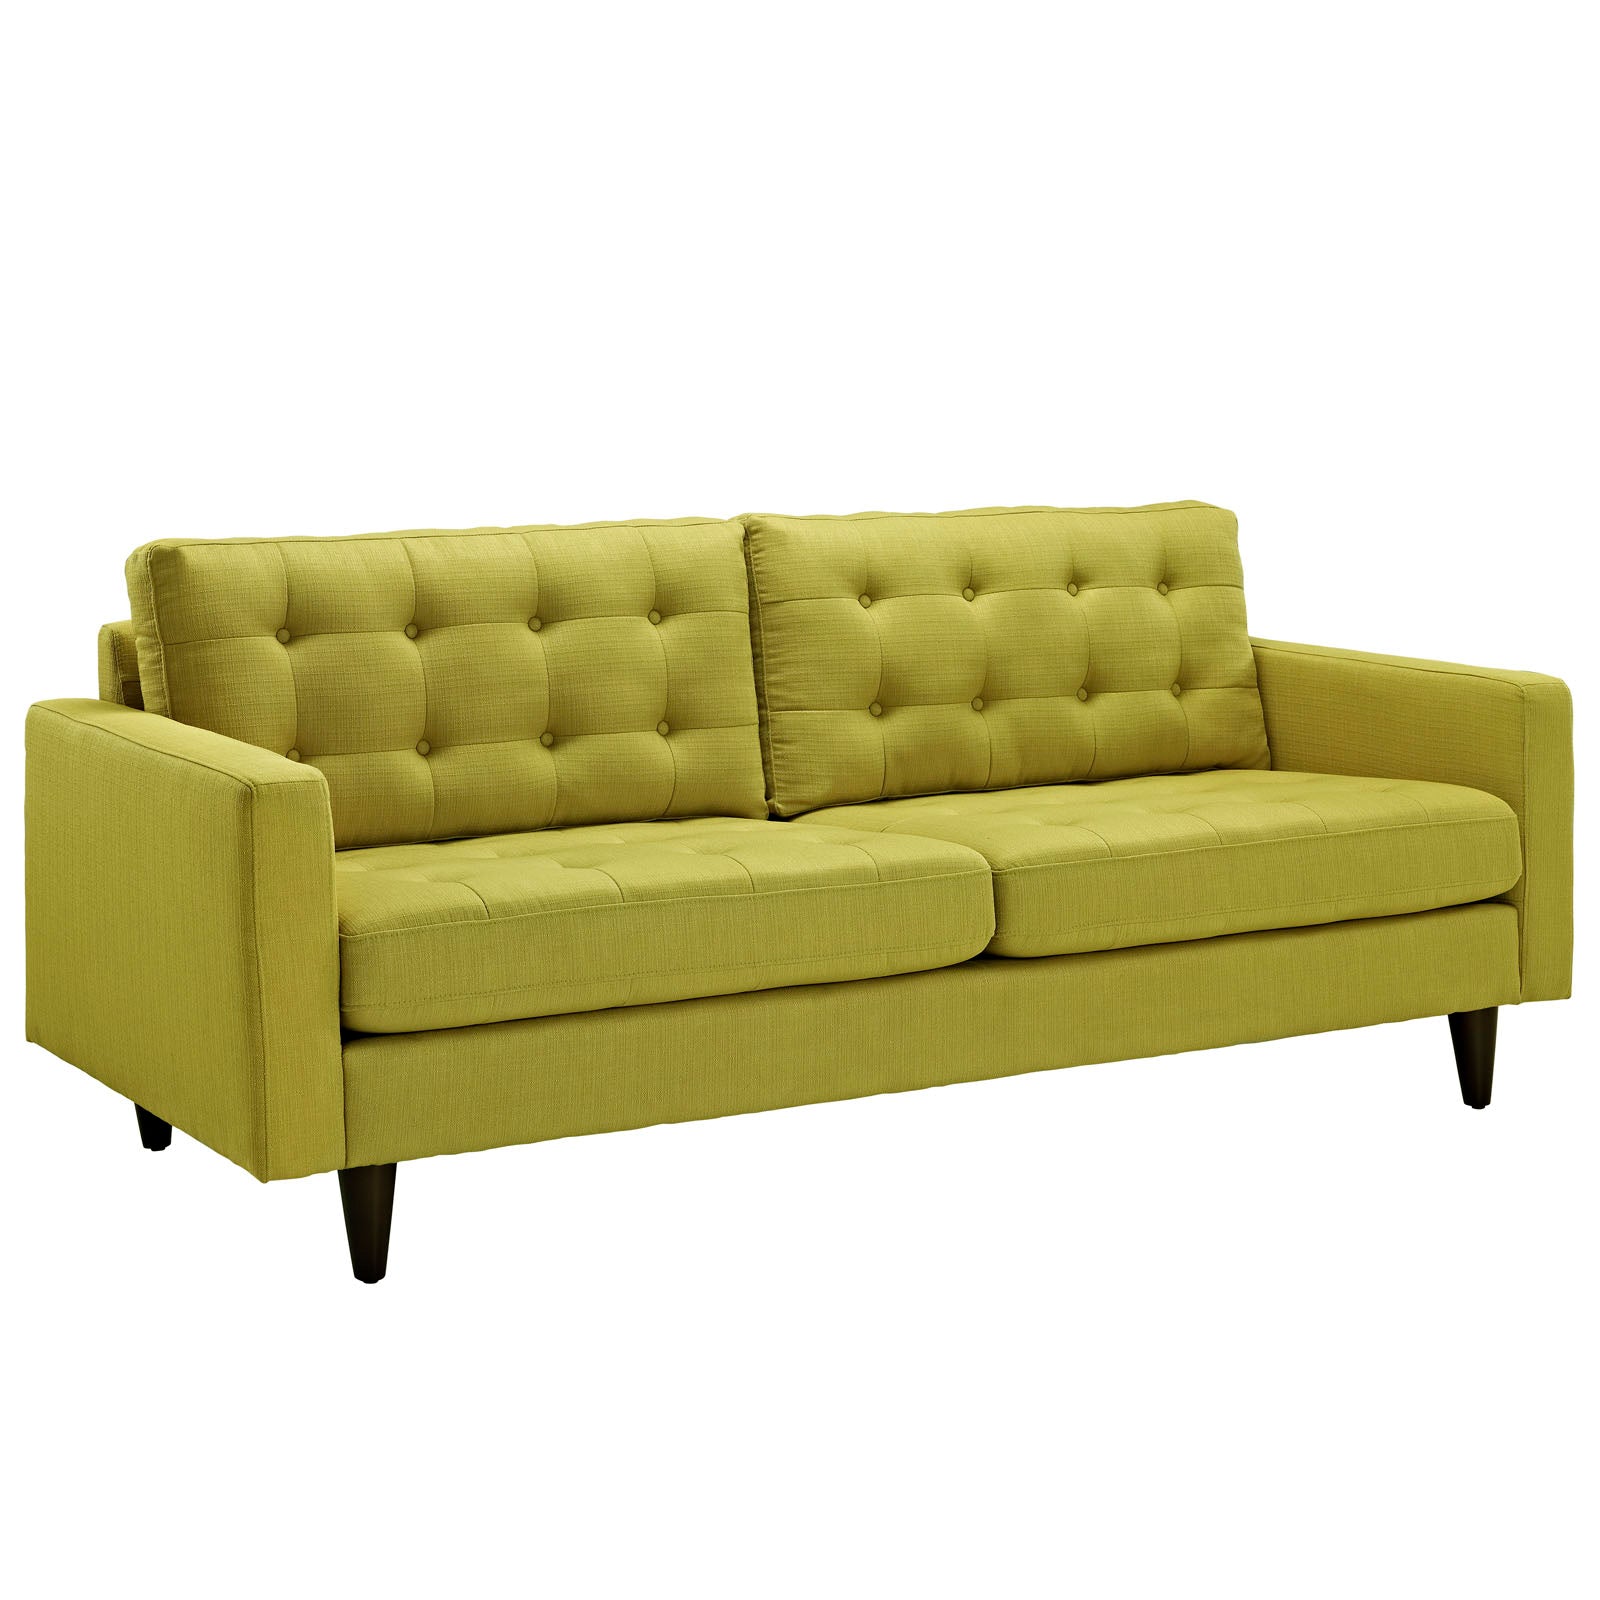 Modway Living Room Sets - Empress Sofa And Armchairs Set Of 3 Wheatgrass